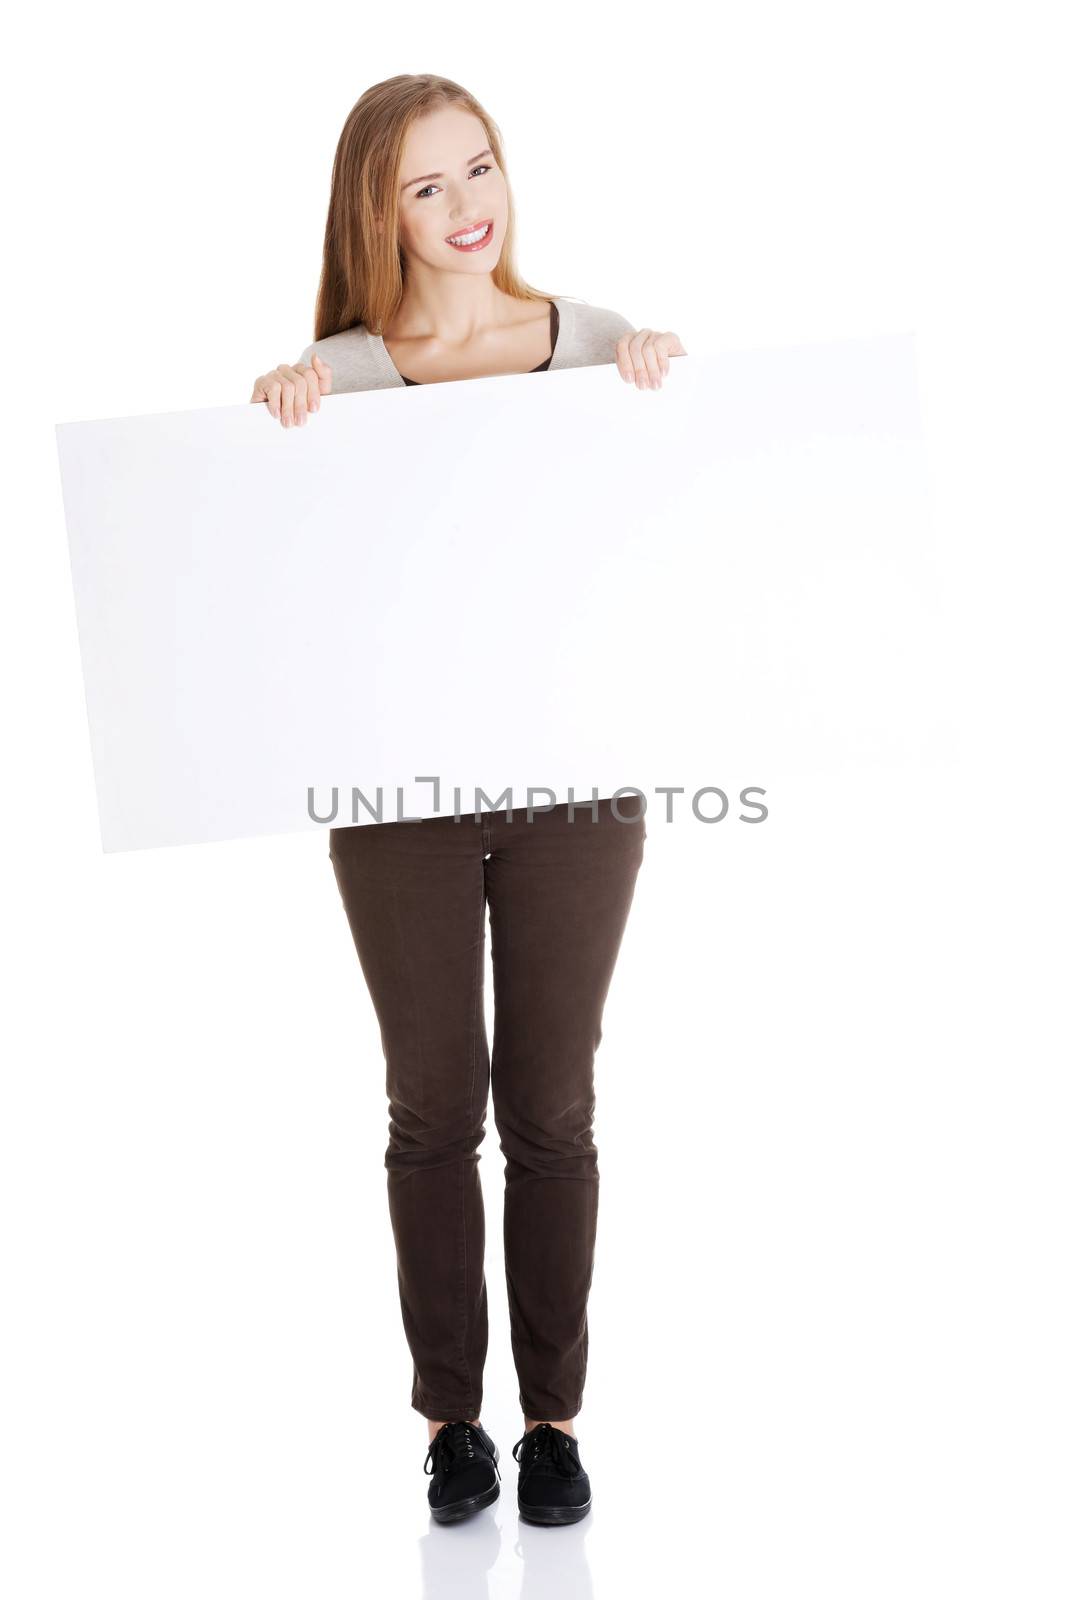 Beautiful casual woman holding copy space and advertising. Isolated on white.